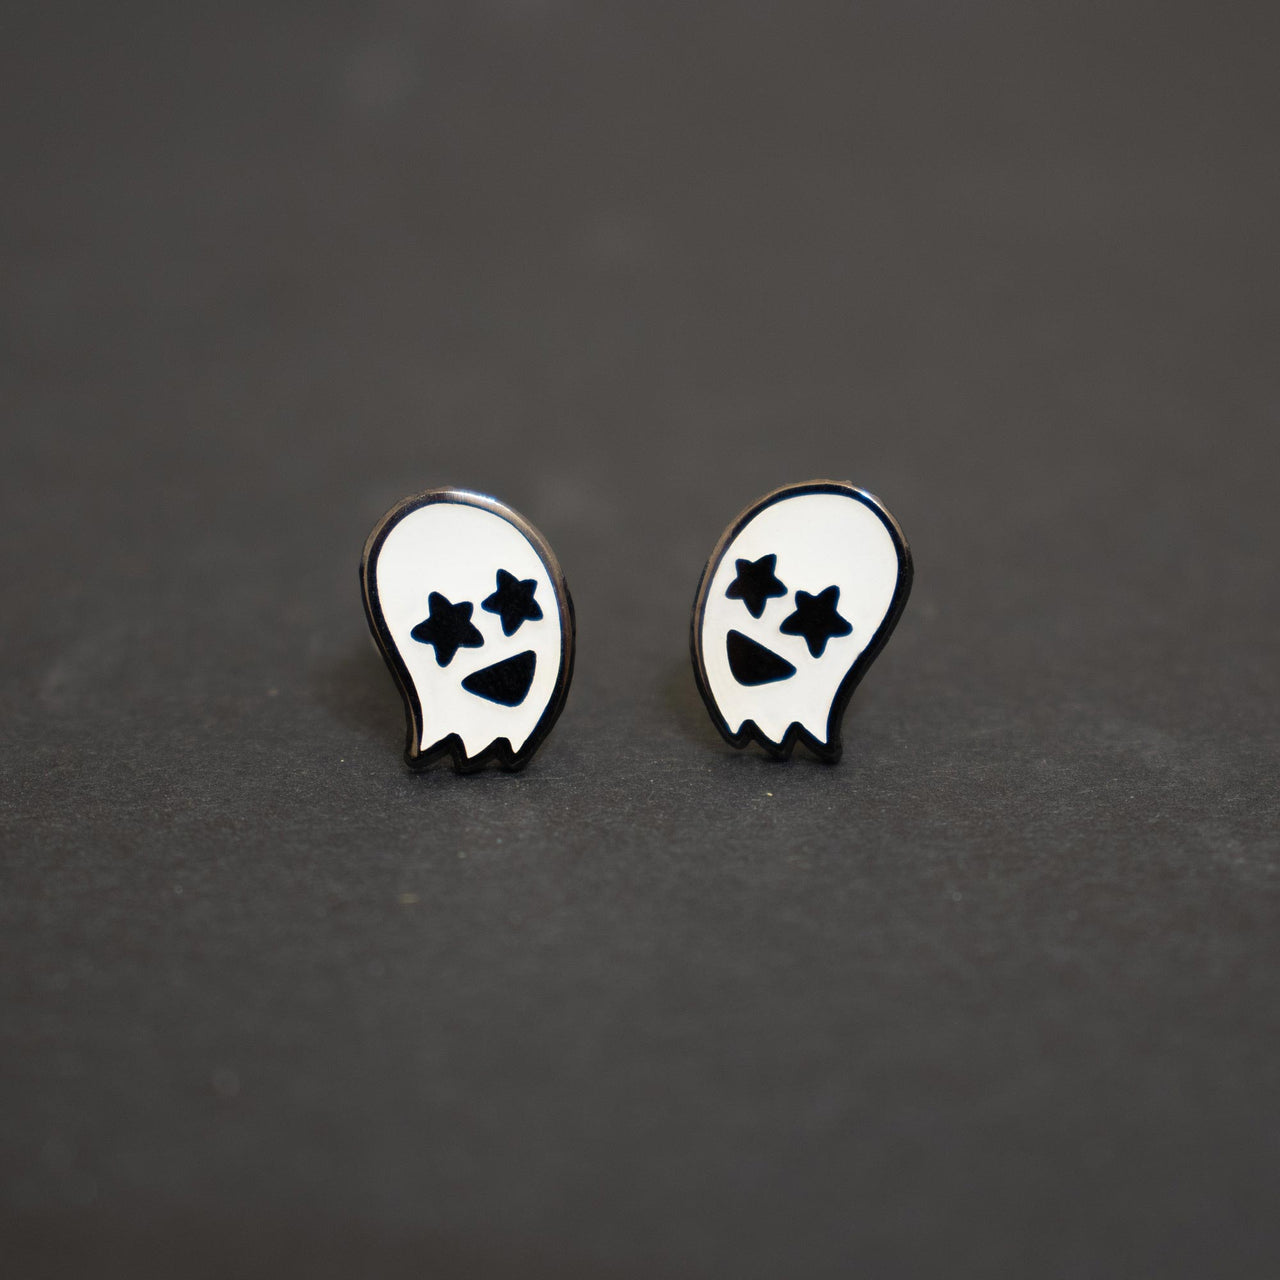 Starry Eyed Ghost Earring Studs